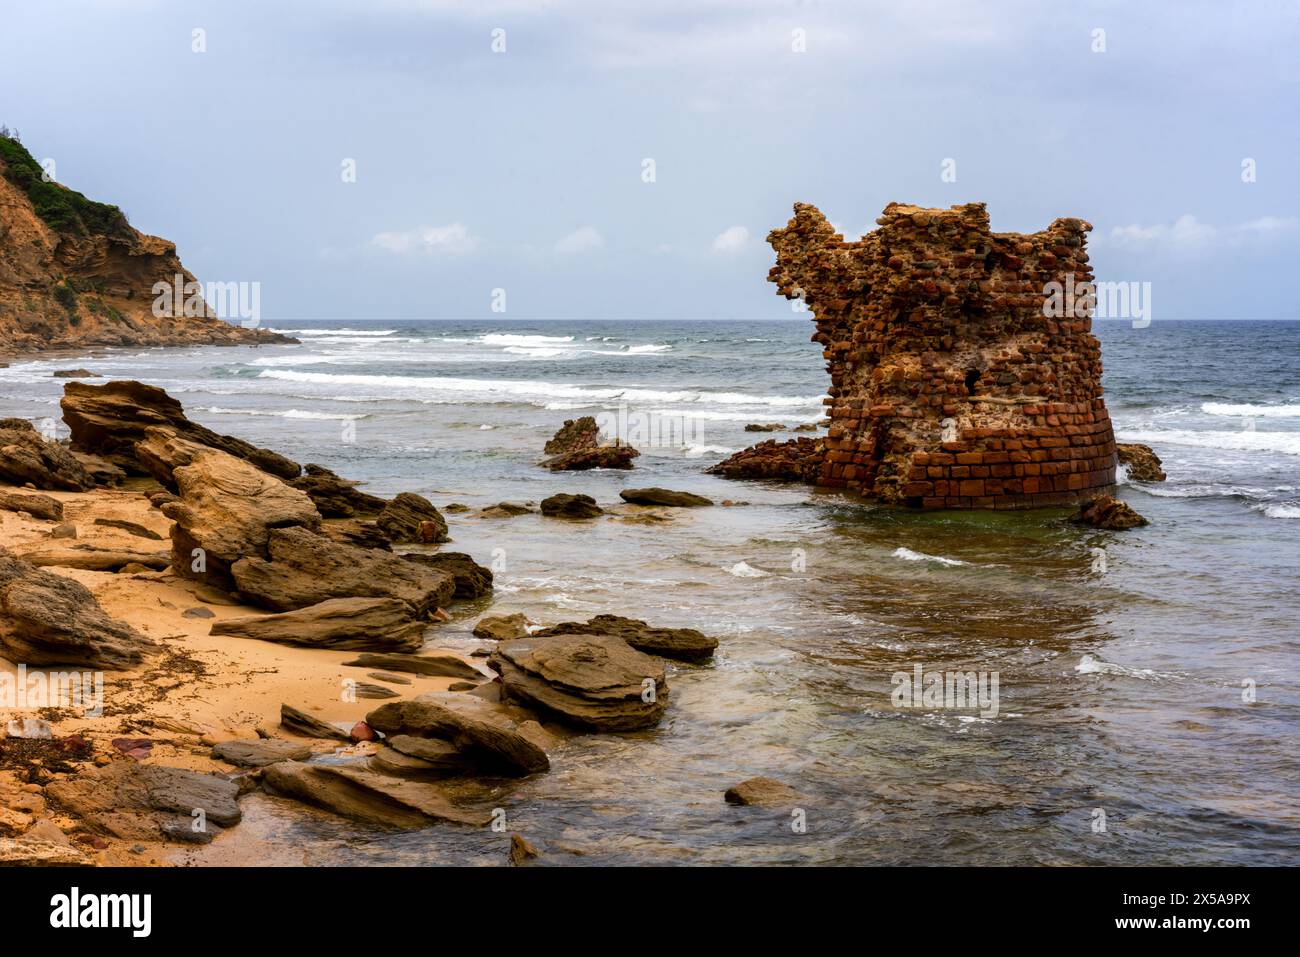 Ruins of a historic tower standing on a rocky Porto Paglia beach under a cloudy sky, symbolizing past civilizations Stock Photo